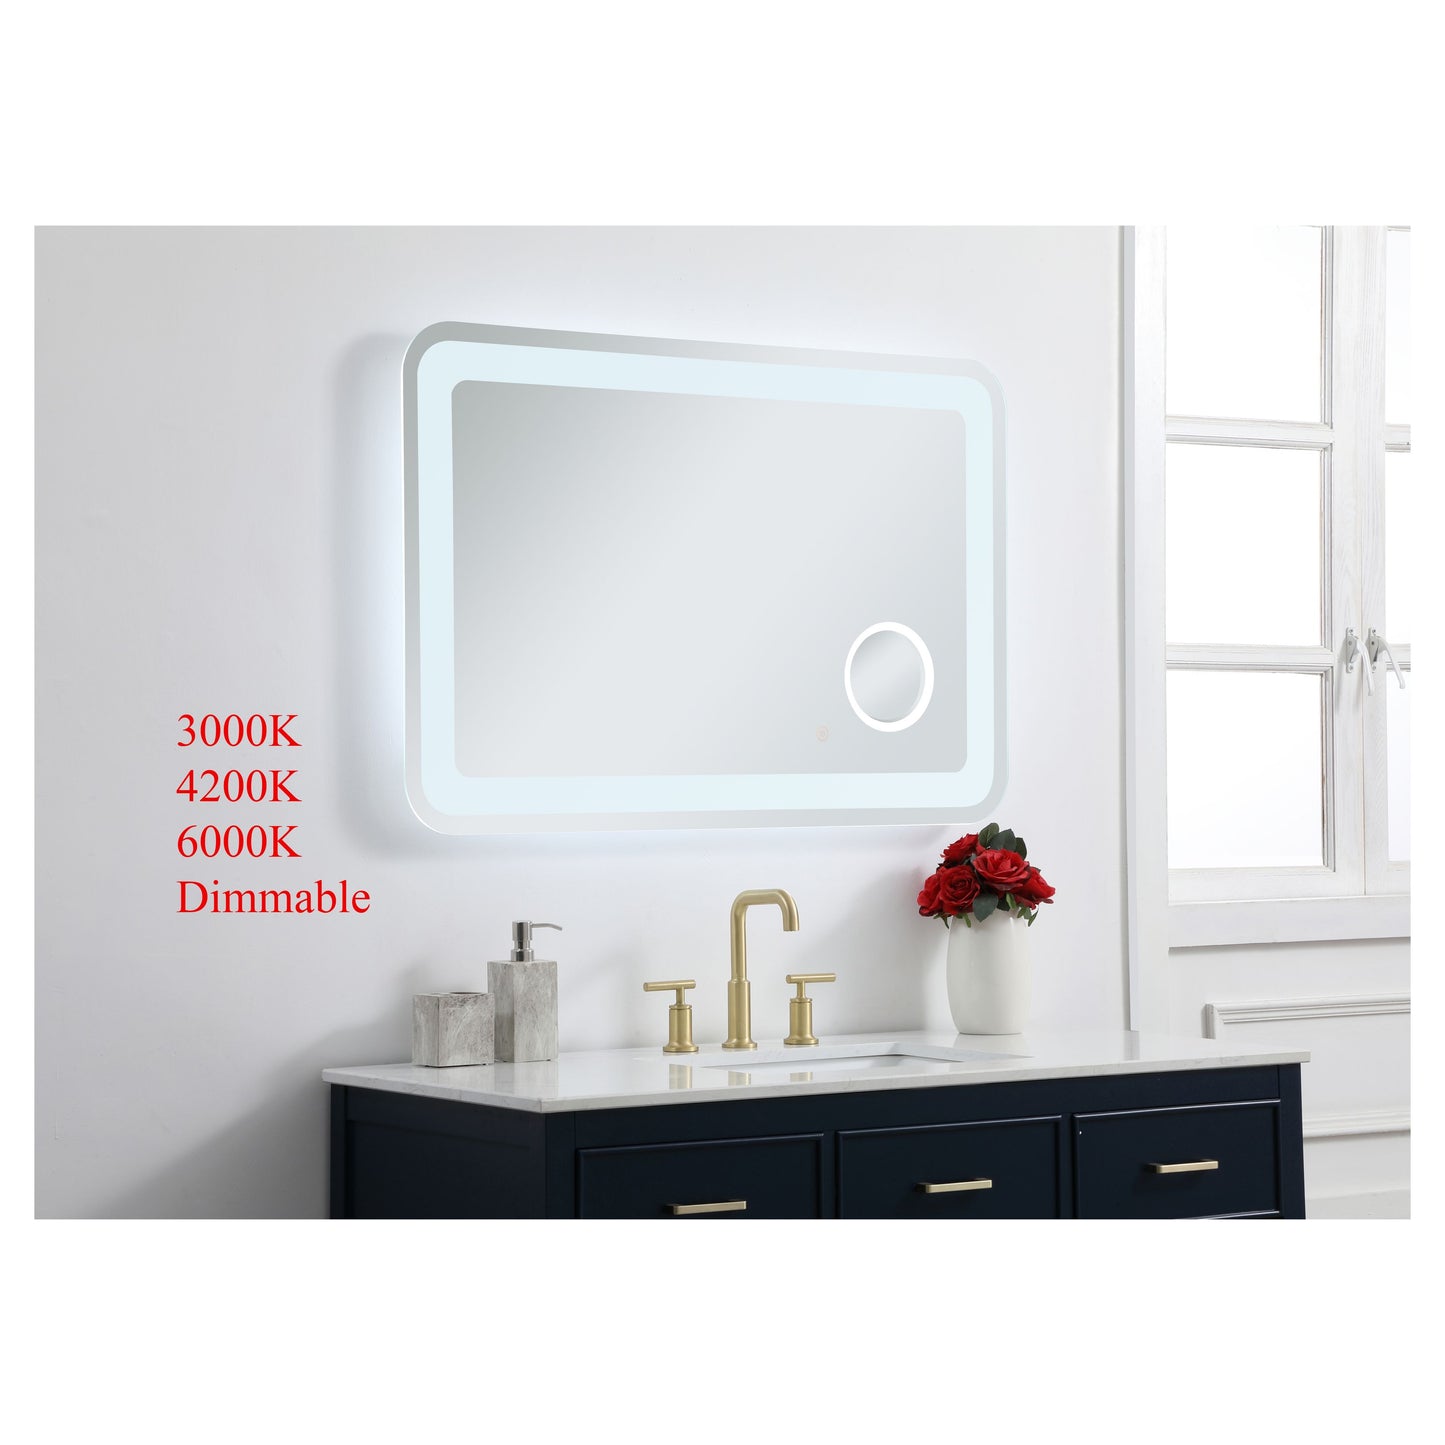 MRE52740 Lux 40" x 27" LED Mirror in Glossy White - Adjustable Color Temp